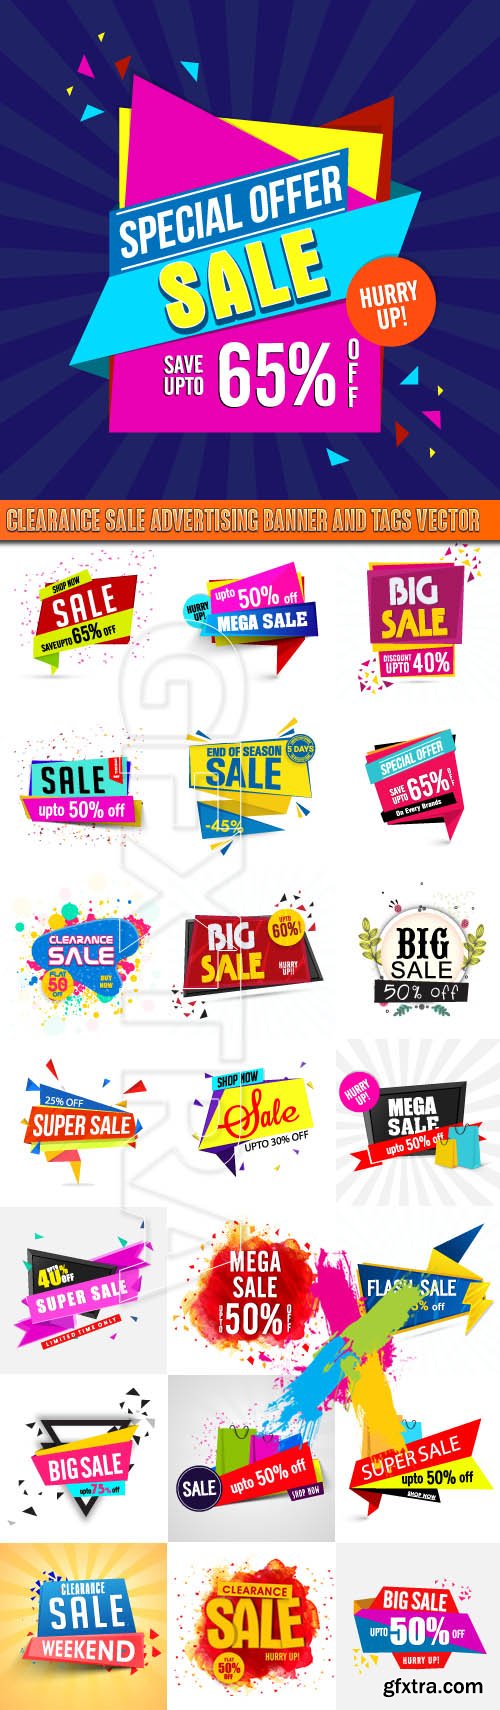 Clearance Sale Advertising Banner and Tags vector